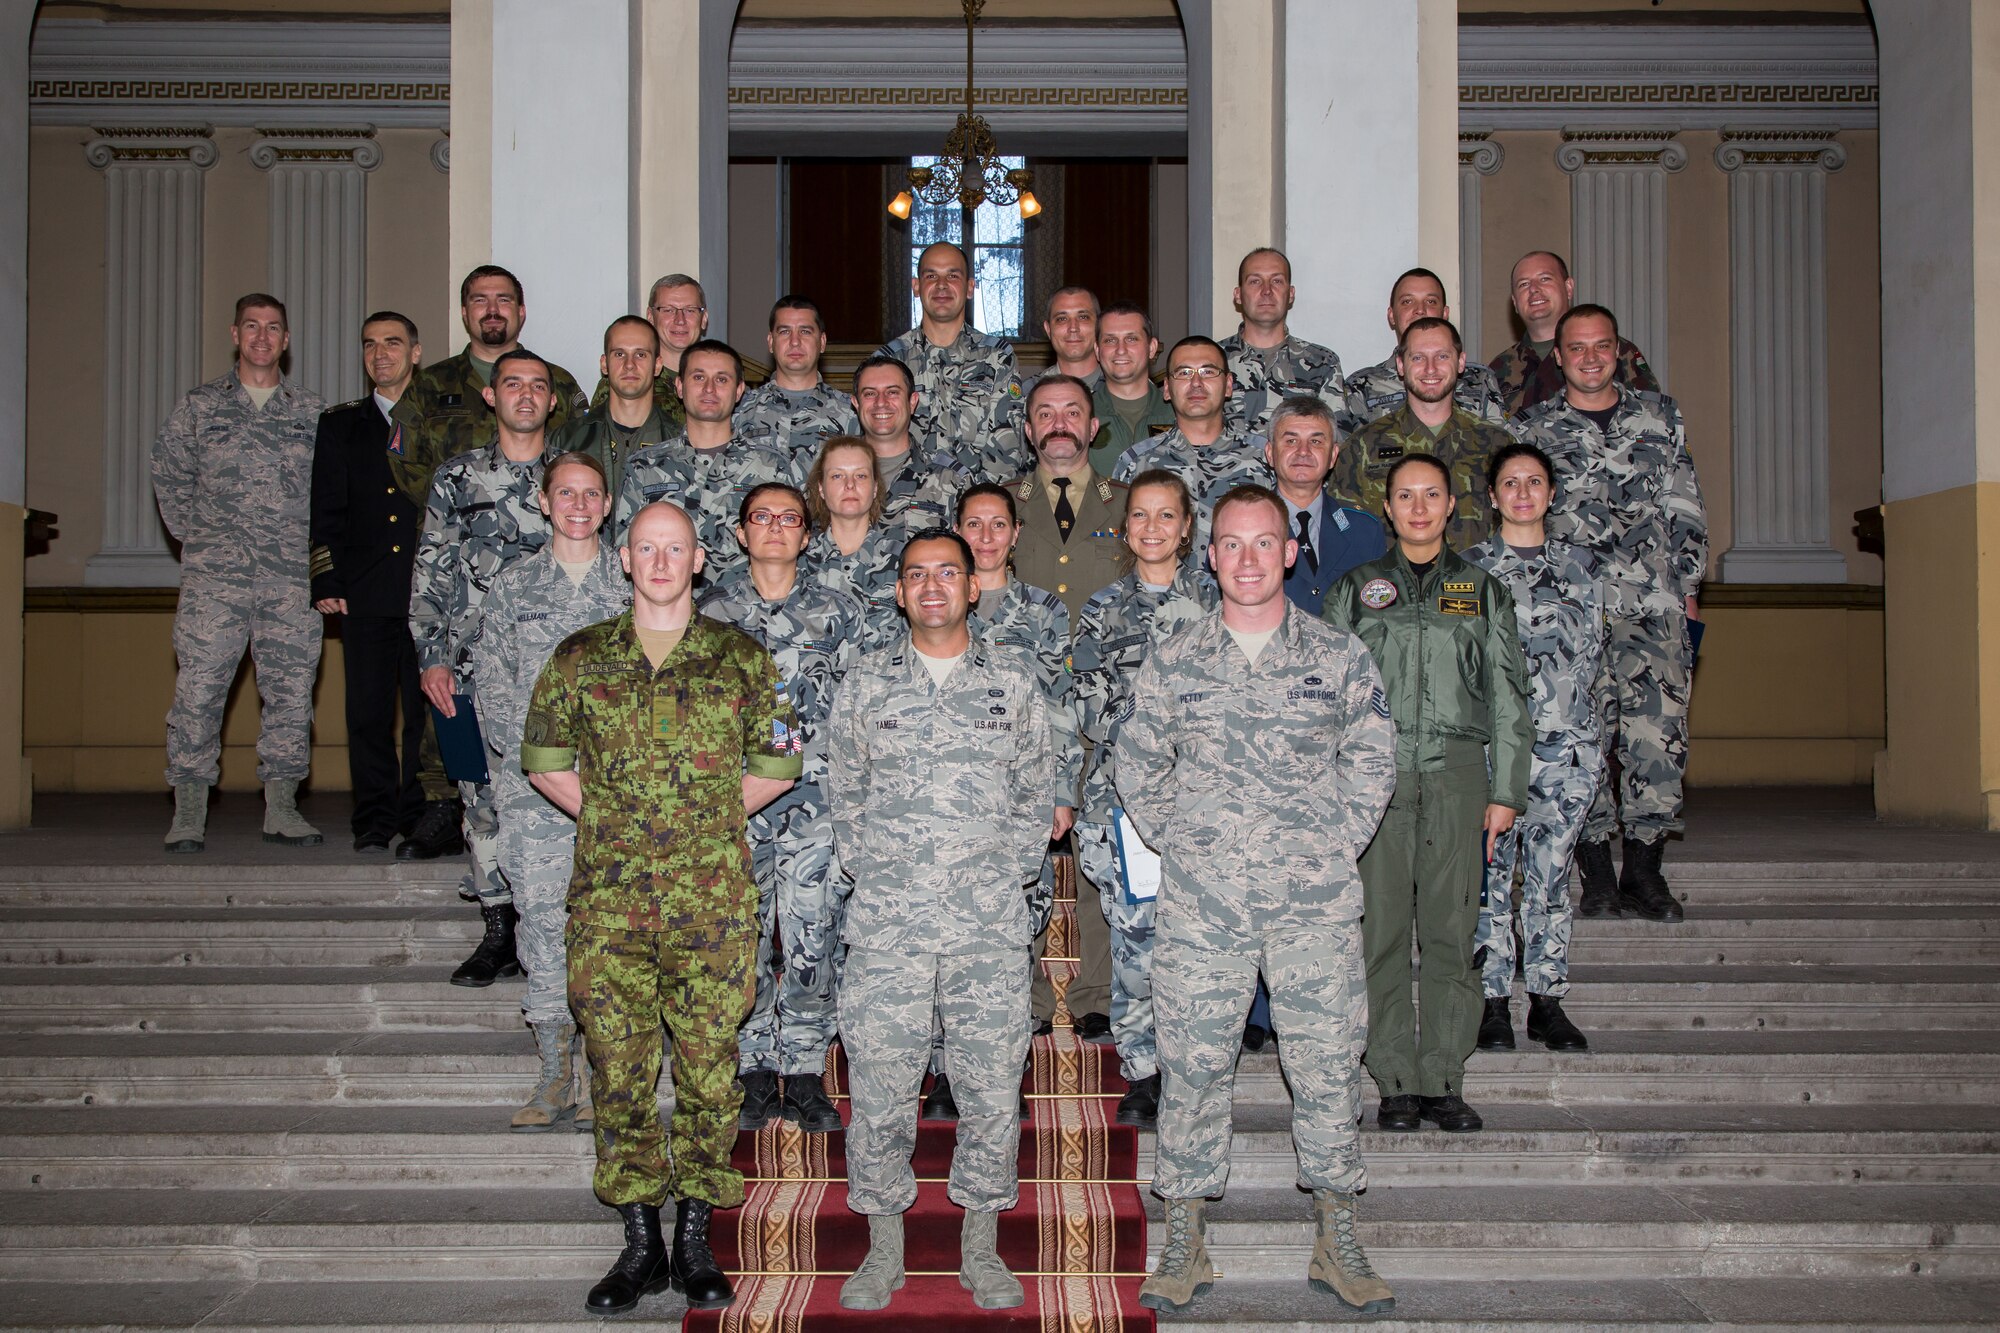 Students and instructors pose for a photo after graduation from the first ever IEAFA combined international officer and NCO PME course in Sofia, Bulgaria, Nov. 13, 2015.  Twenty-three students from Bulgaria, Czech Republic, Estonia, and Hungary participated in the inaugural course. (U.S. Air Force photo/SMSgt Travis Robbins/Released)